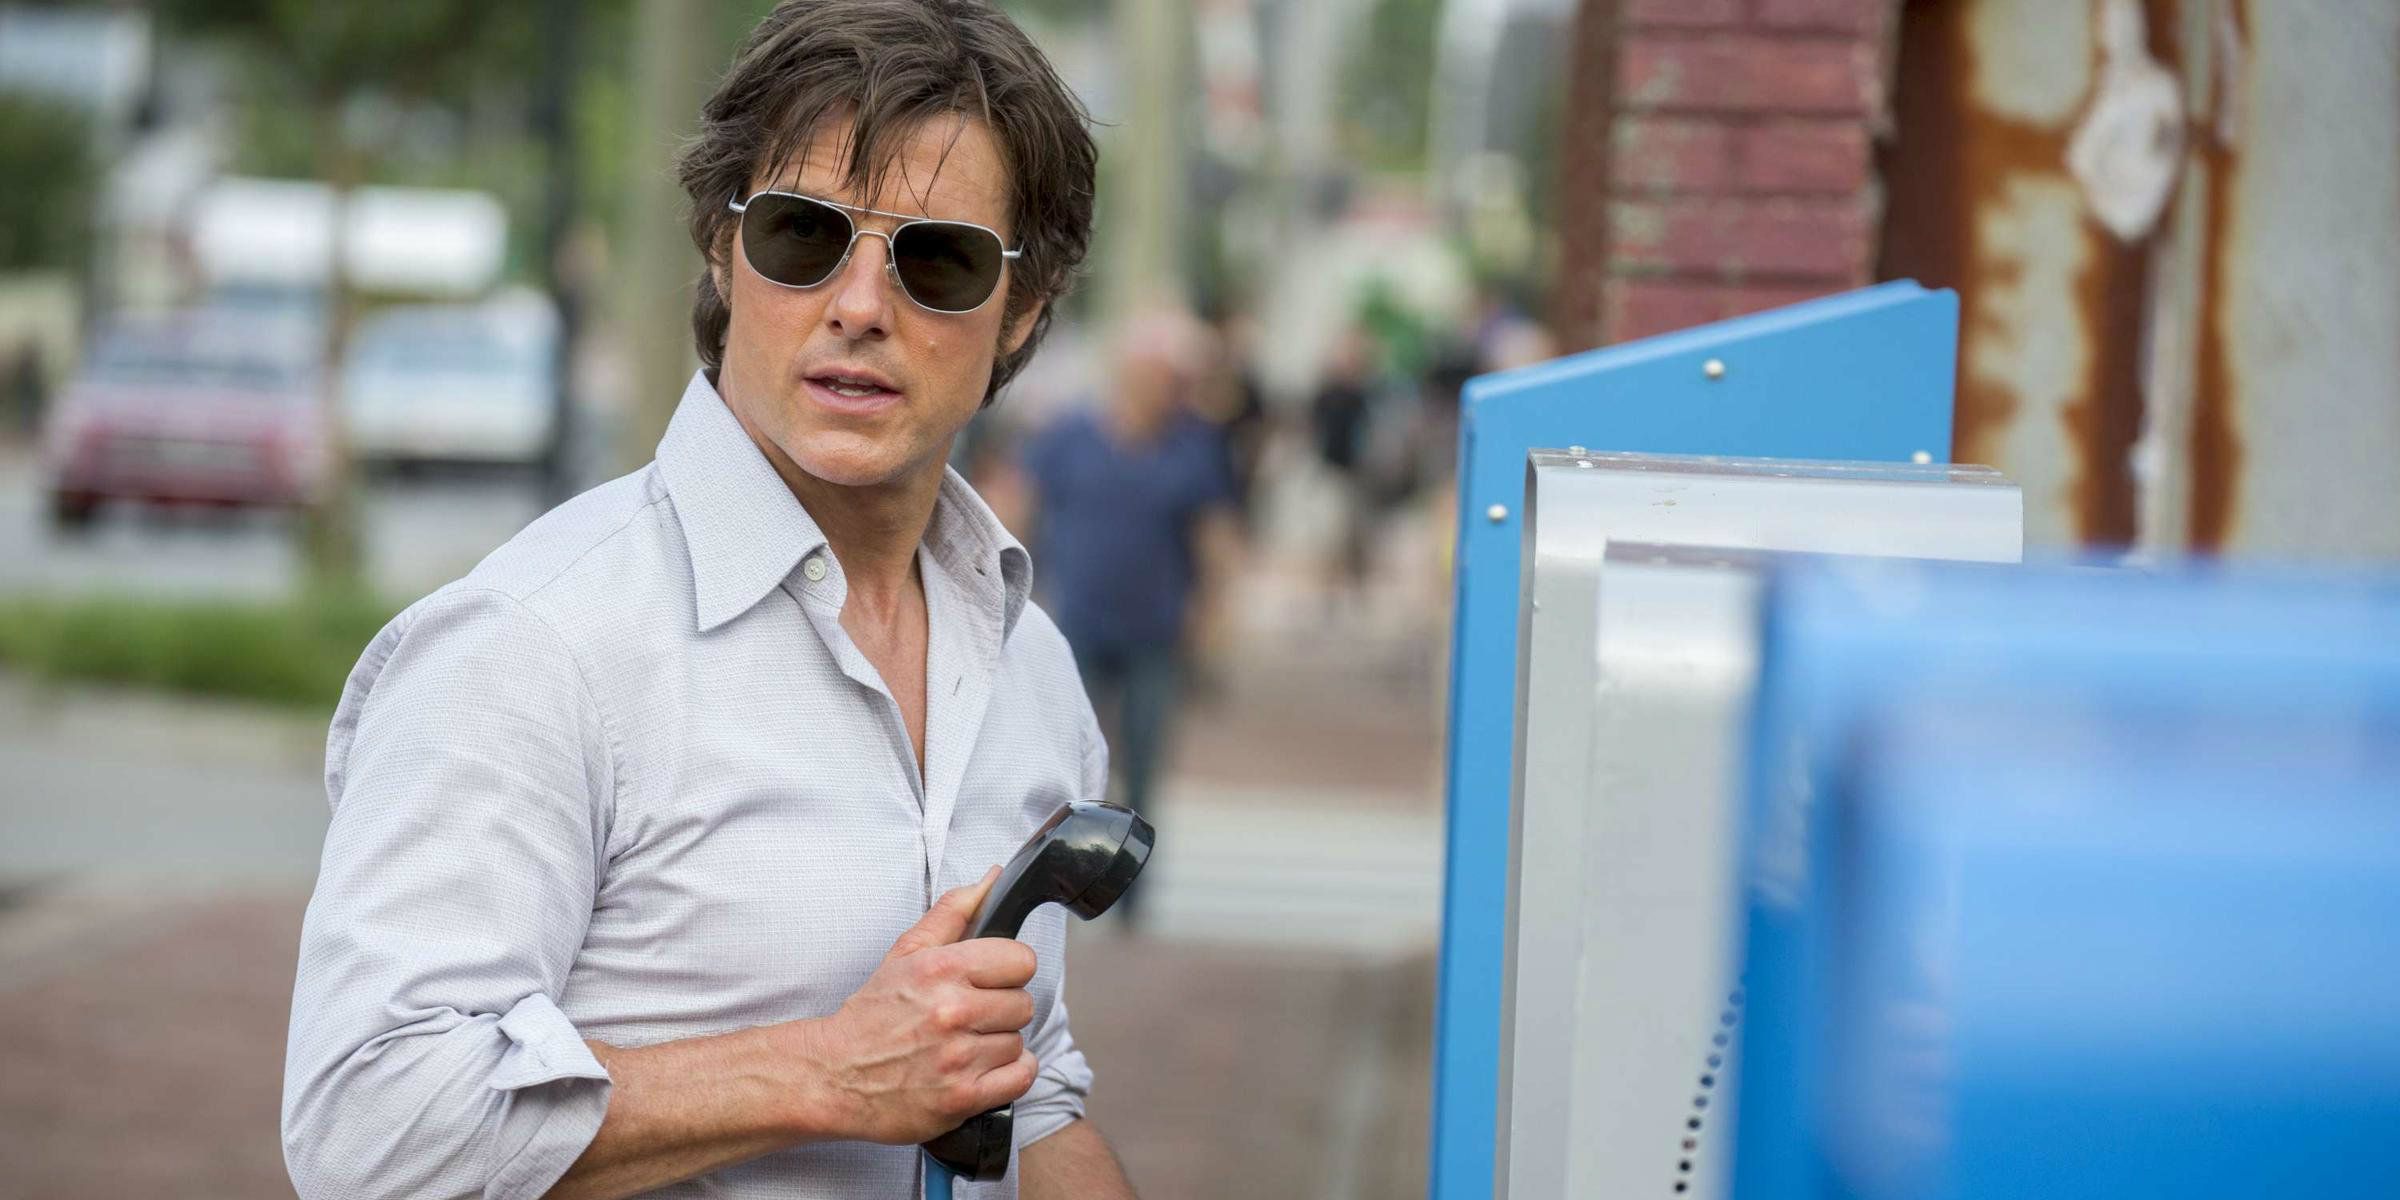 Tom Cruise using a pay phone in American Made